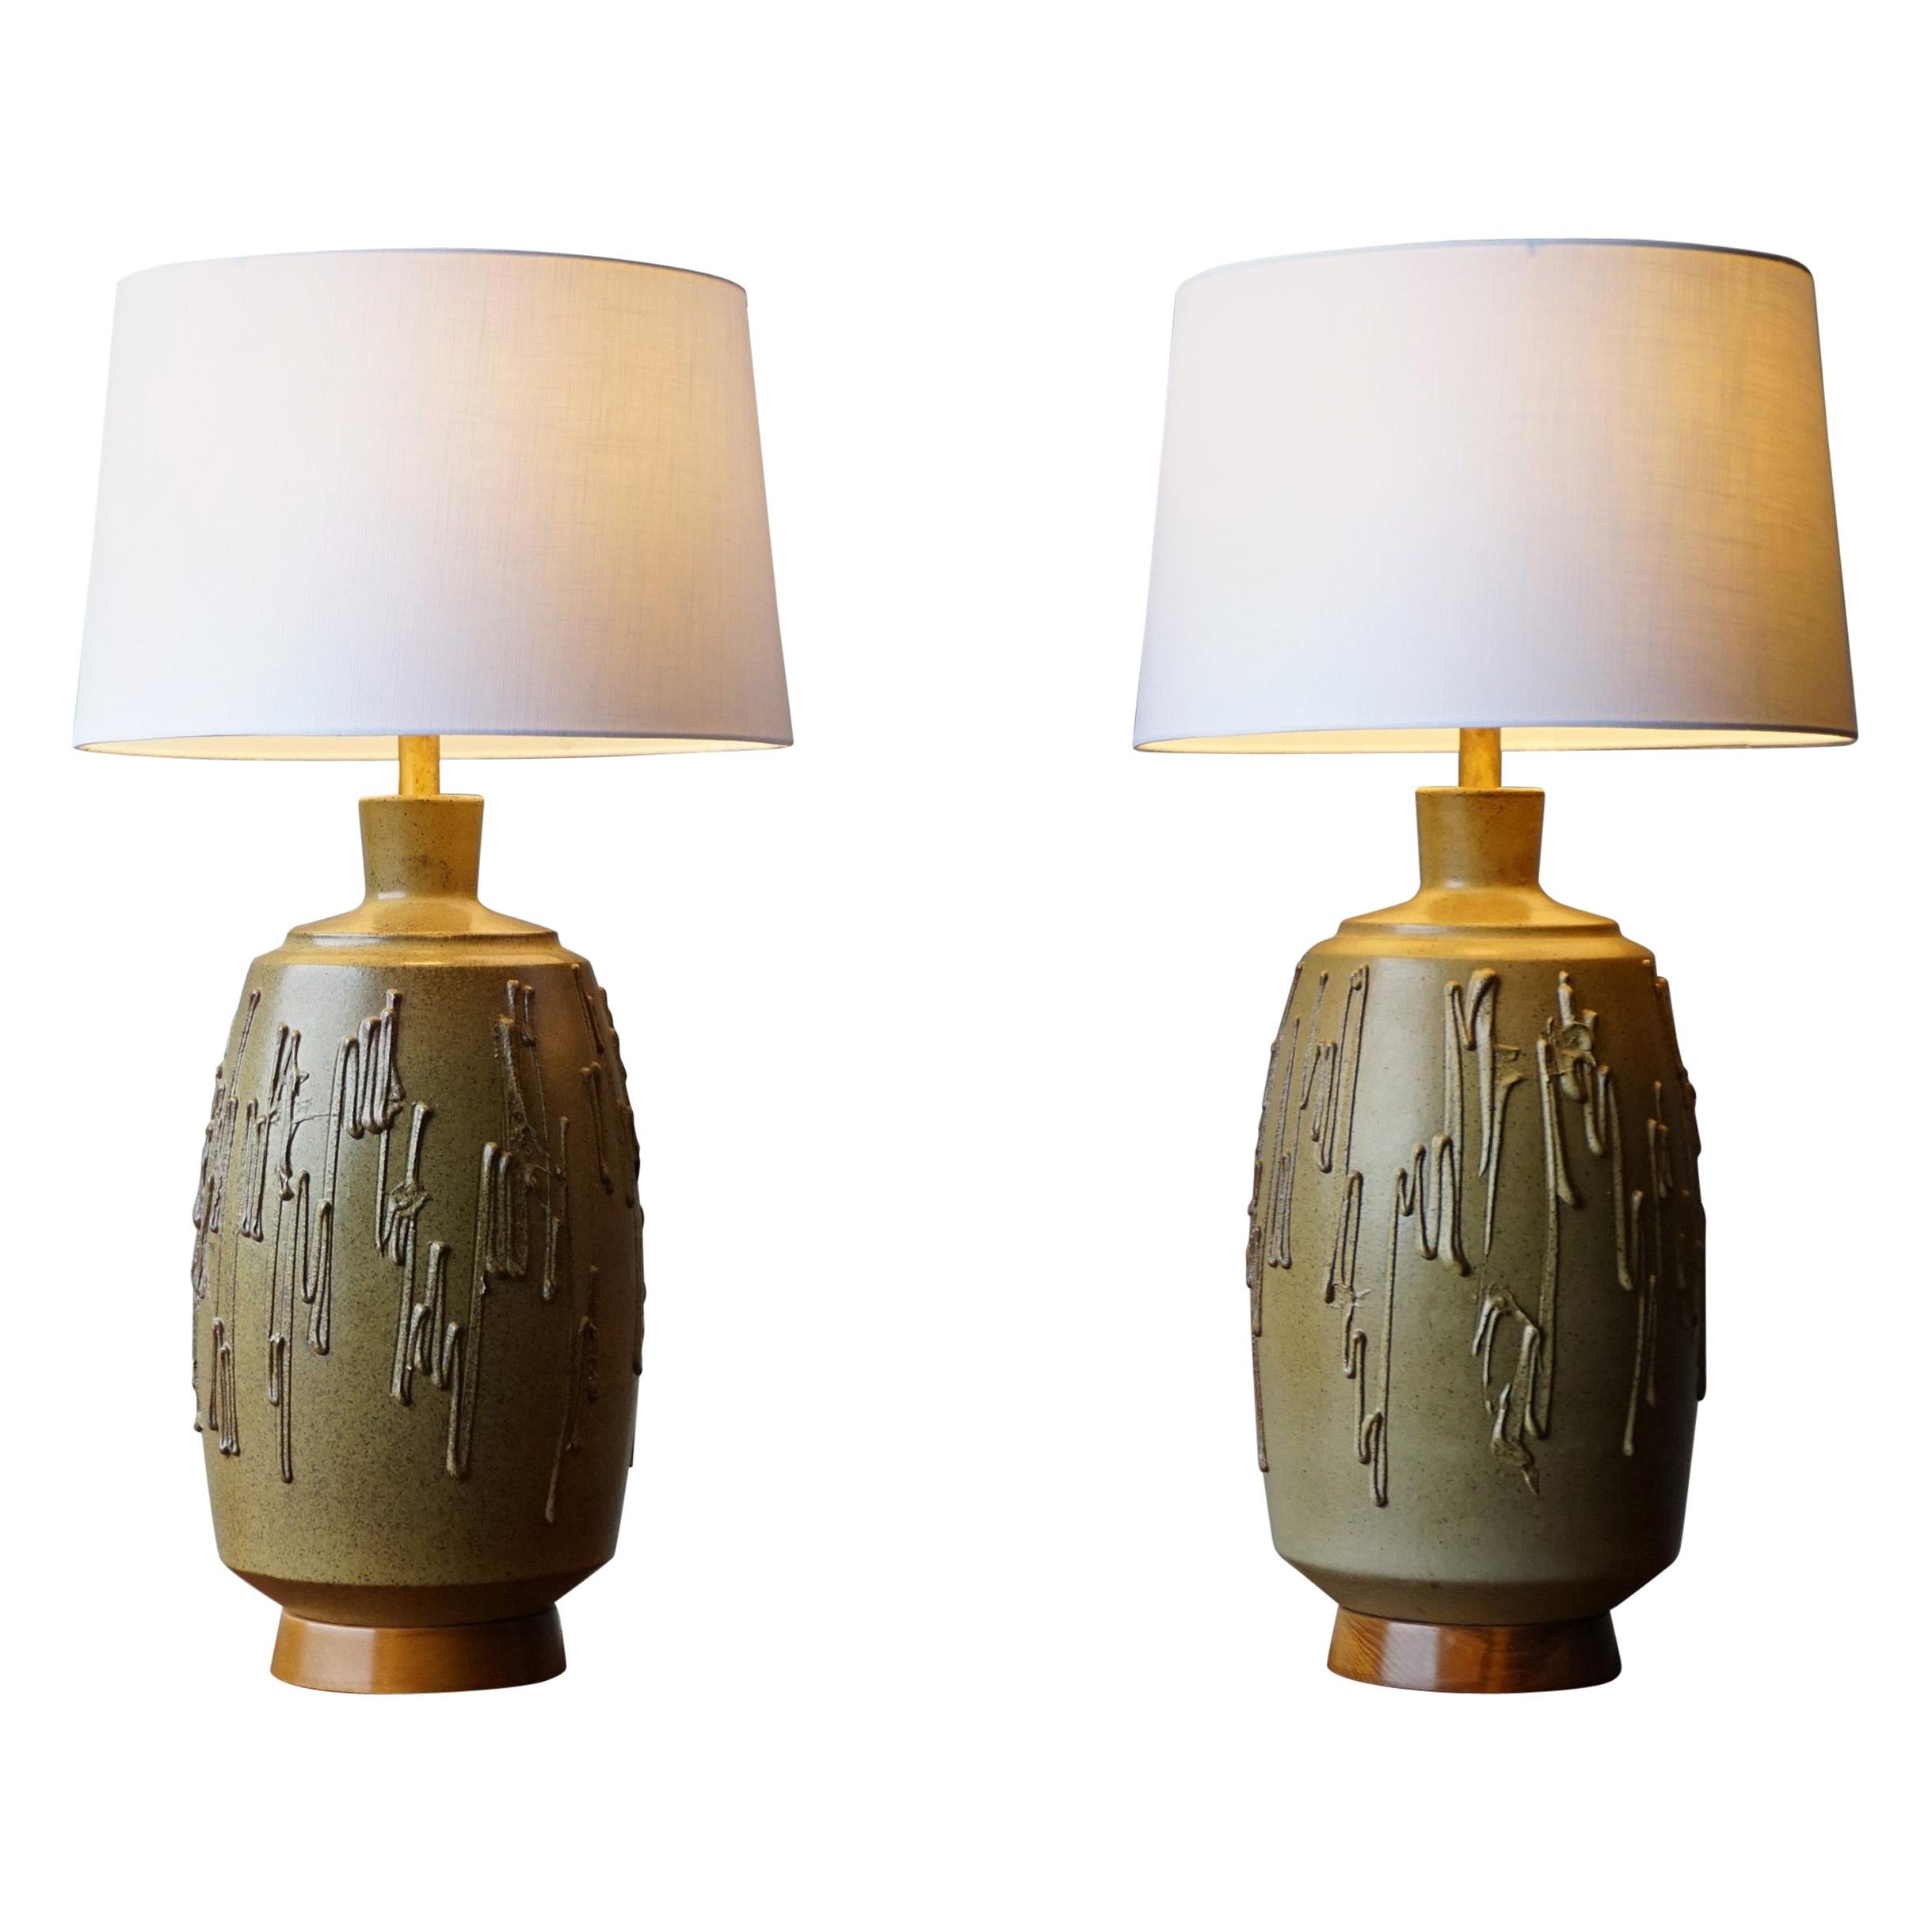 Large David Cressey Ceramic Table Lamps For Sale